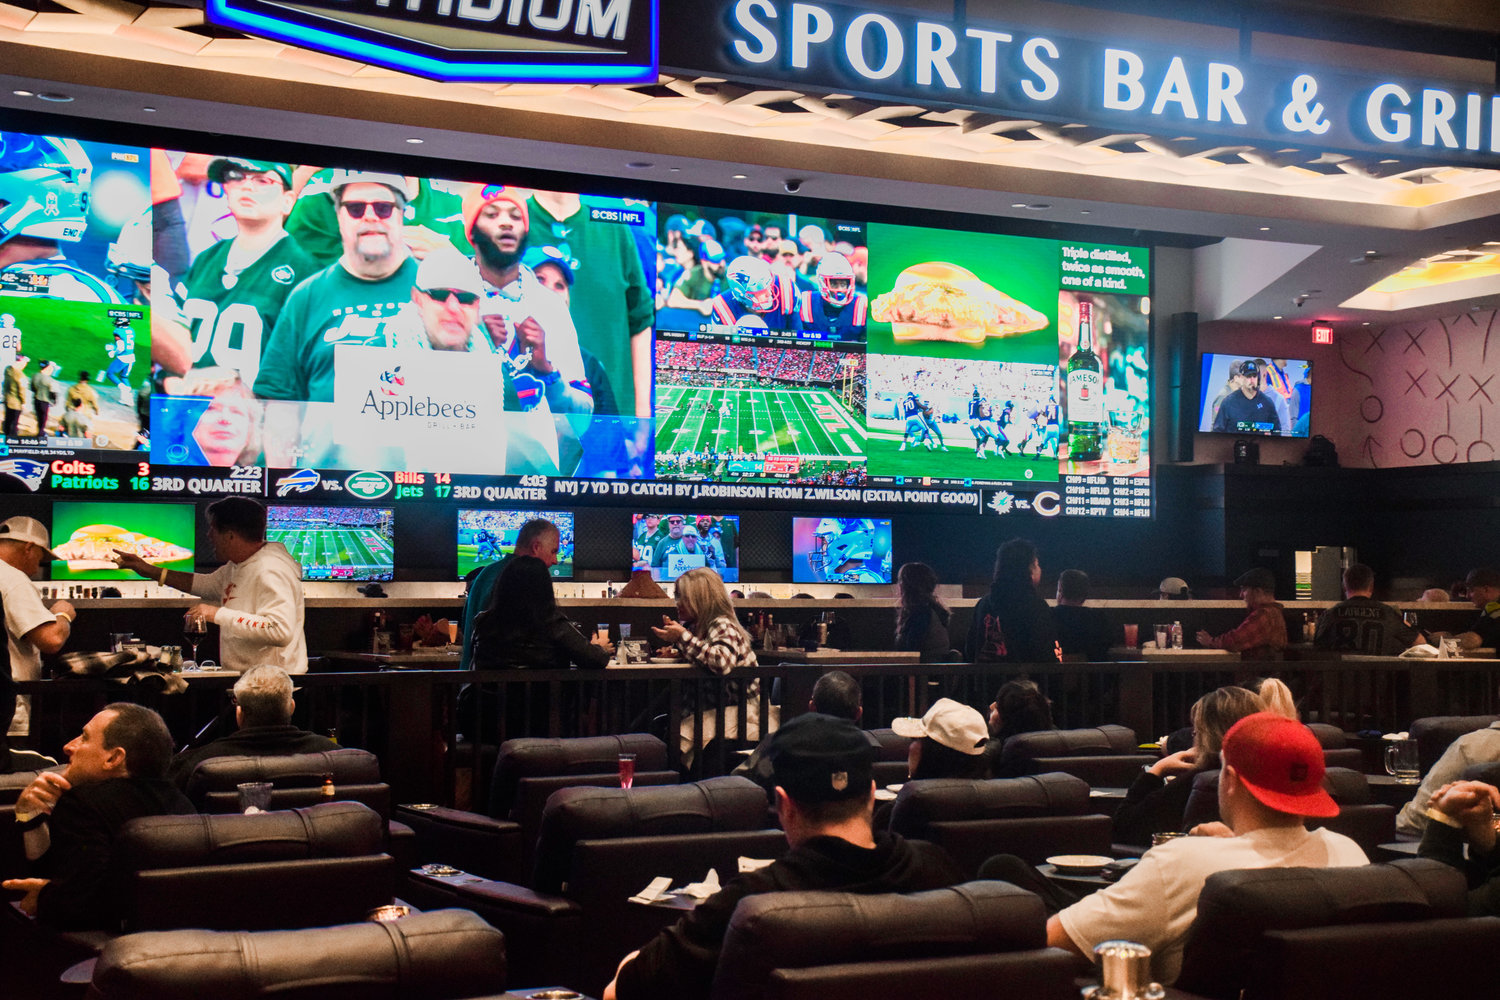 Patrons of ilani’s sports betting lounge watch games on The Stadium Bar & Grill’s video wall during a grand opening for wagering on Nov. 6.